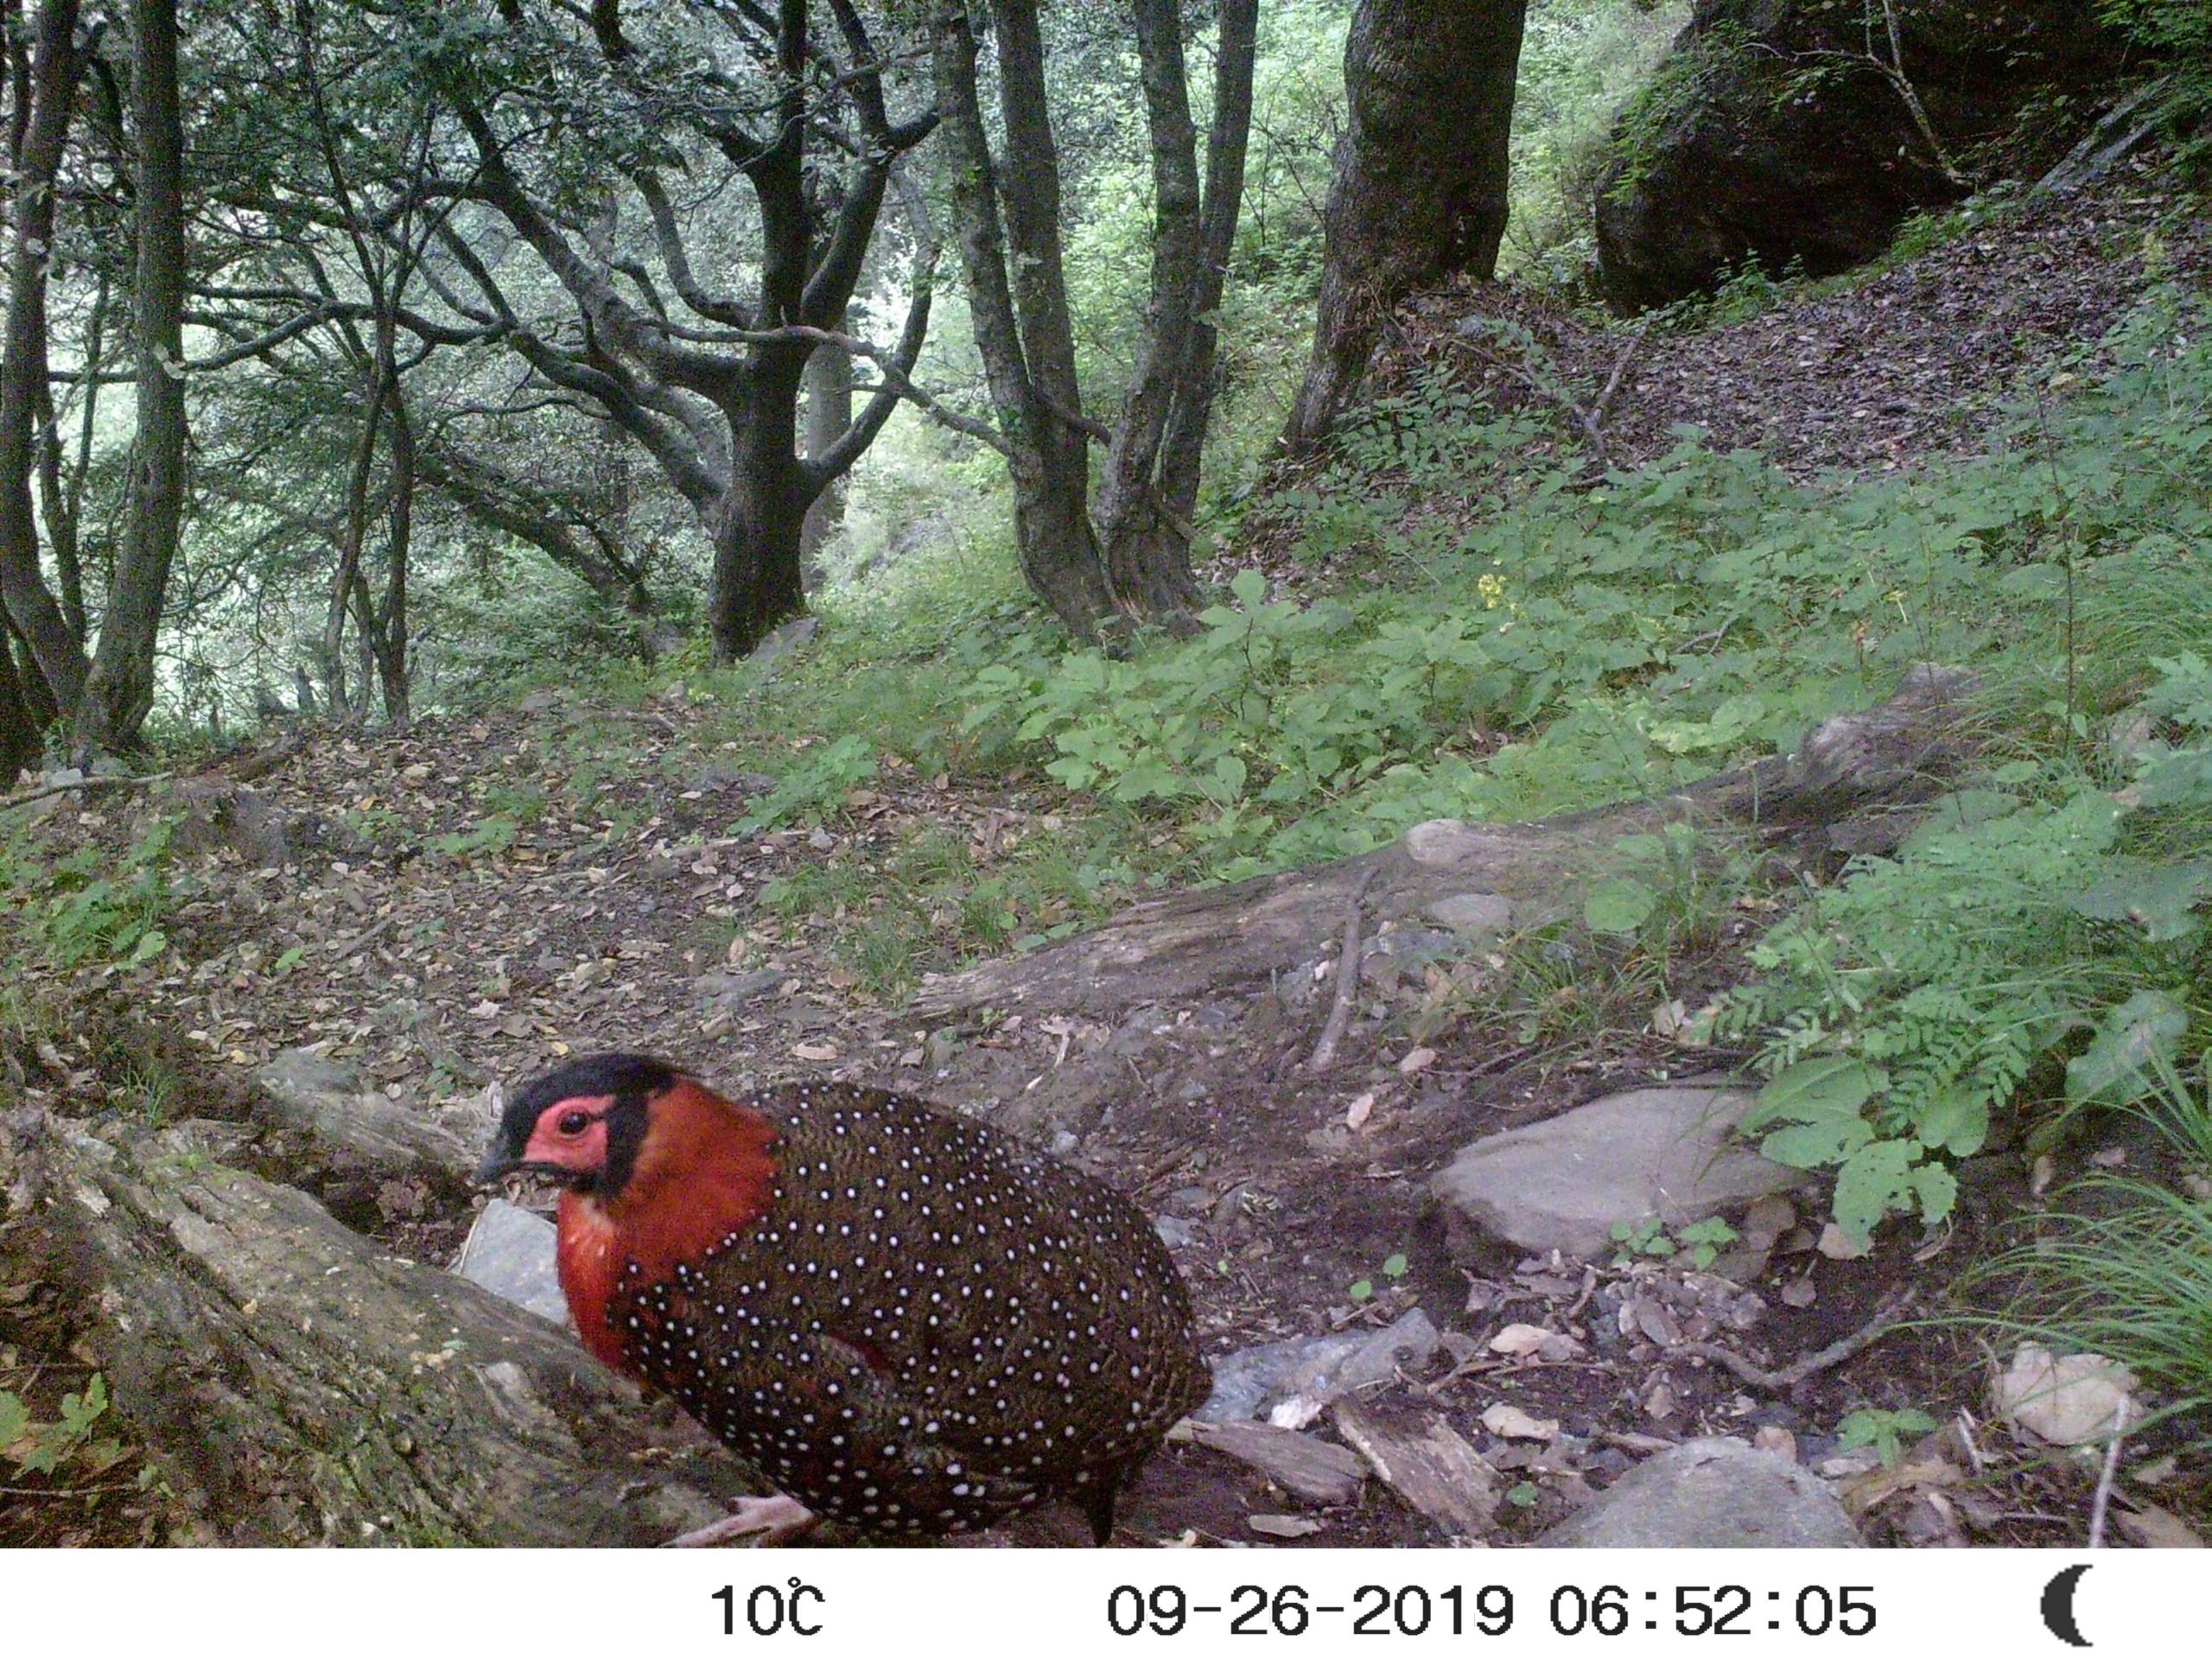 Western tragopan, captured on a camera trap in the Jagran Valley